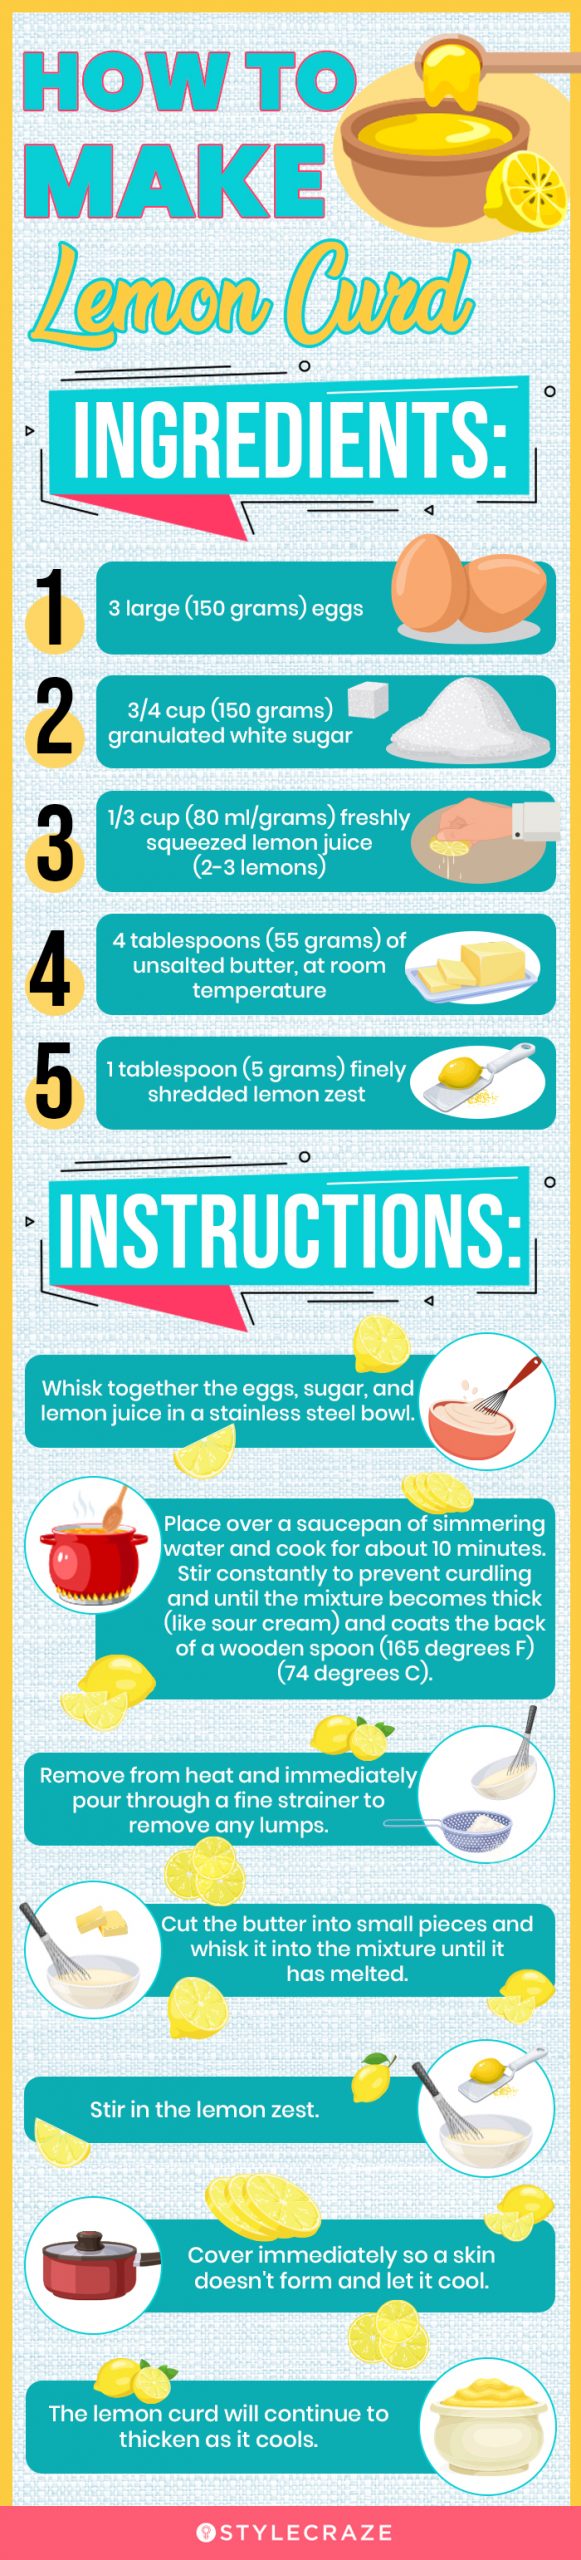 how to make lemon curd [infographic]